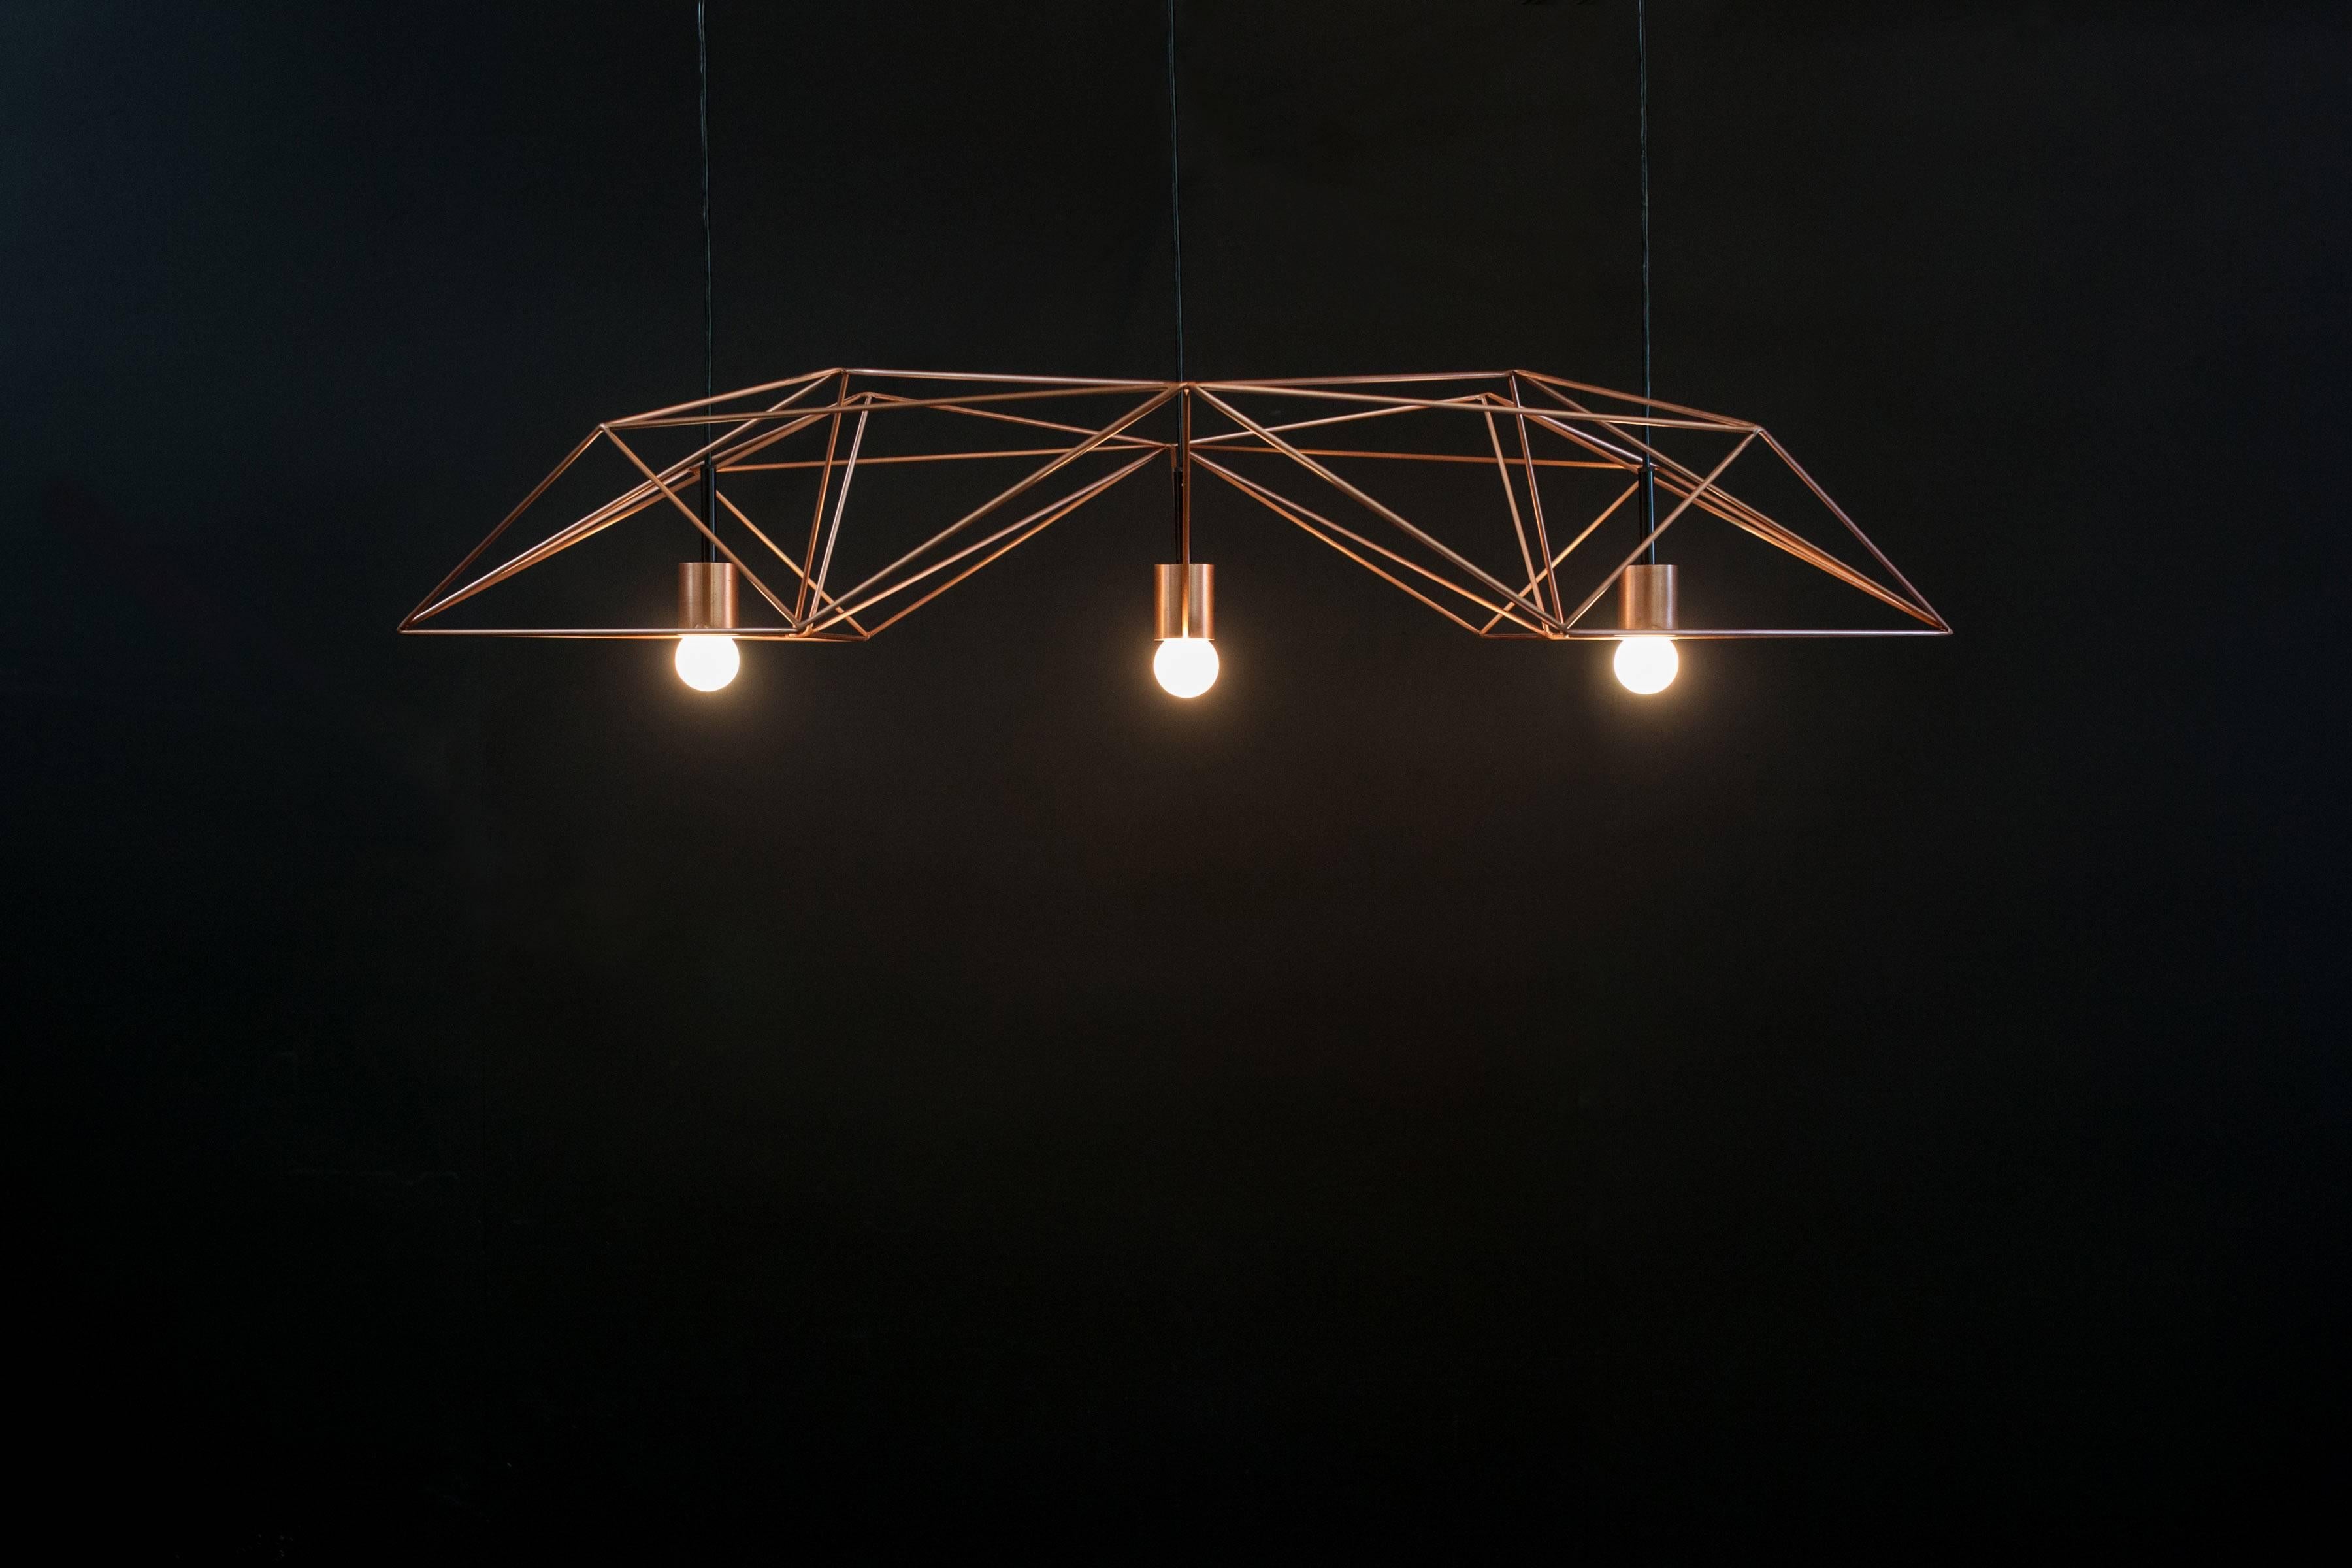 The ‘Crystalline Light’ is a statement chandelier, light in form yet strong in presence. Inspired from mineralogy, this piece – crafted from thin steel rods – gives form and movement to complex patterns depending on your viewpoint. It’s geometric